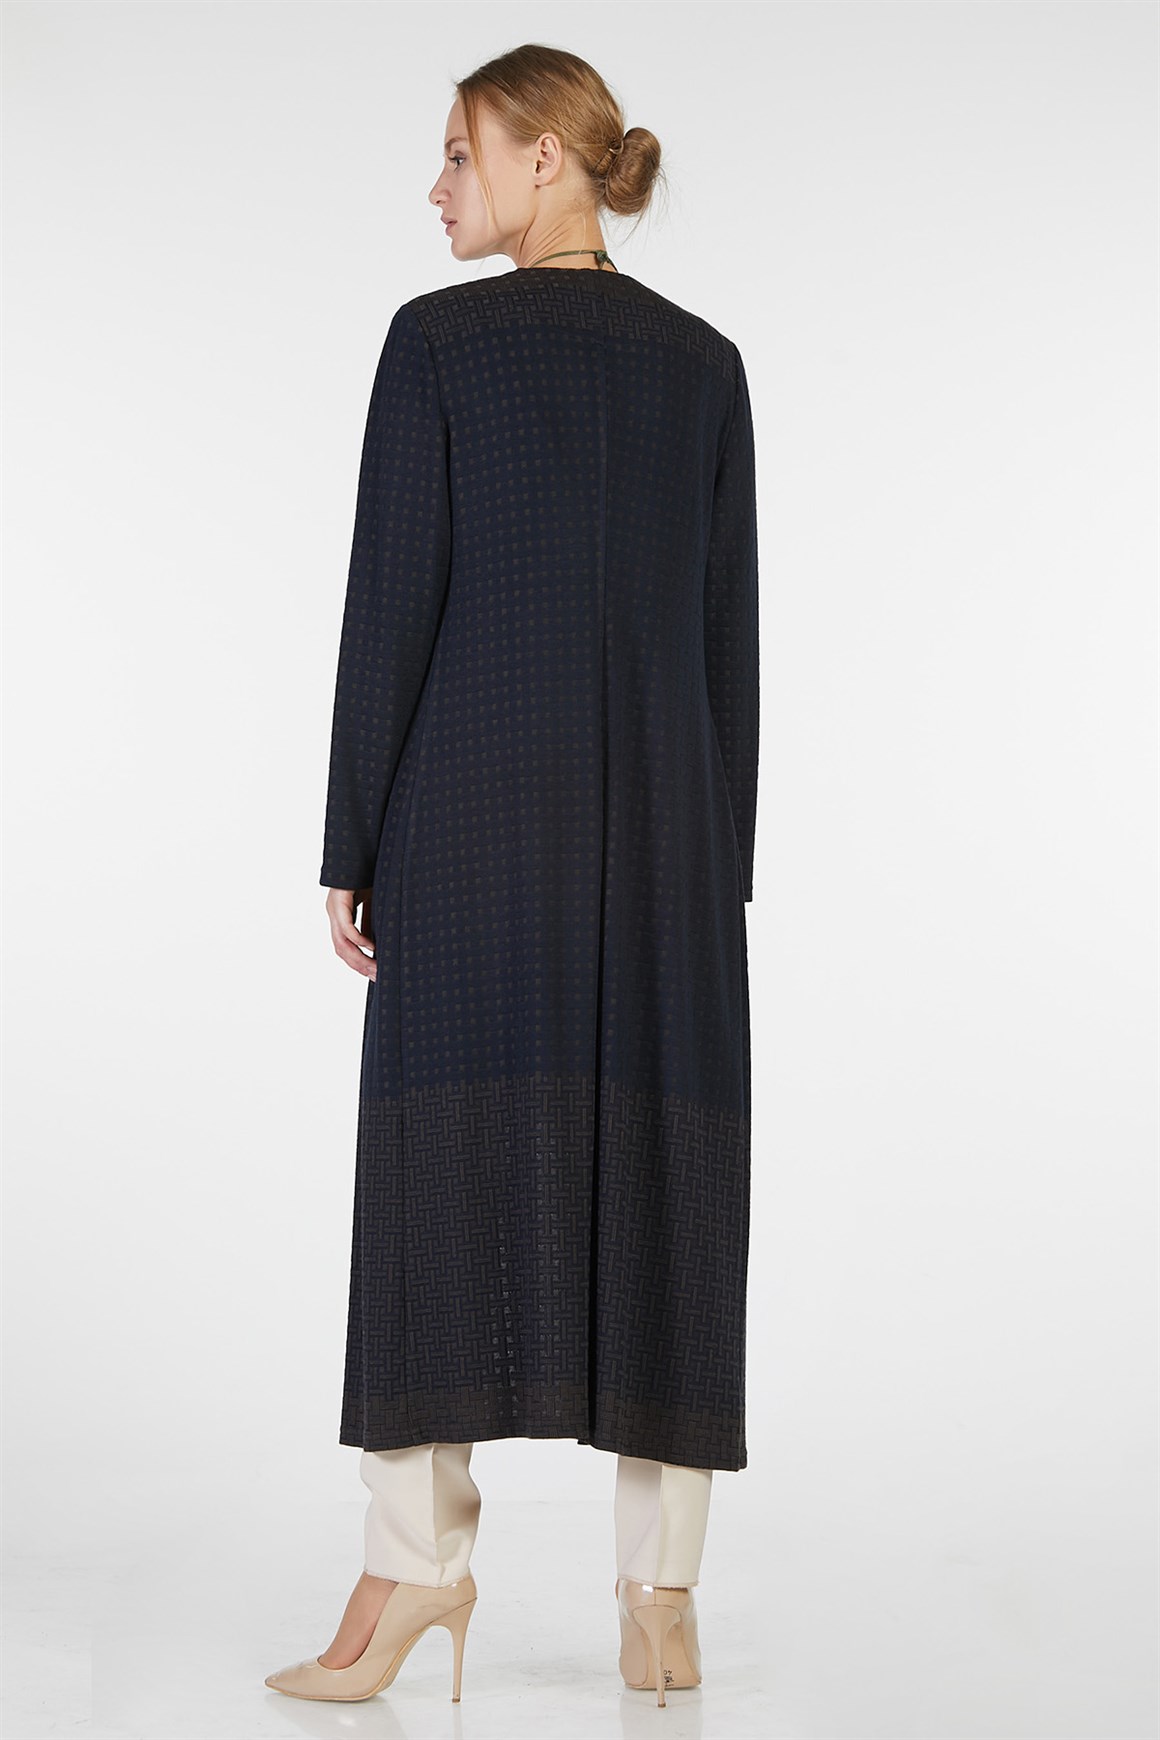 Vison - Patterned Cardigon with Blouse Suit - ESSWAAP